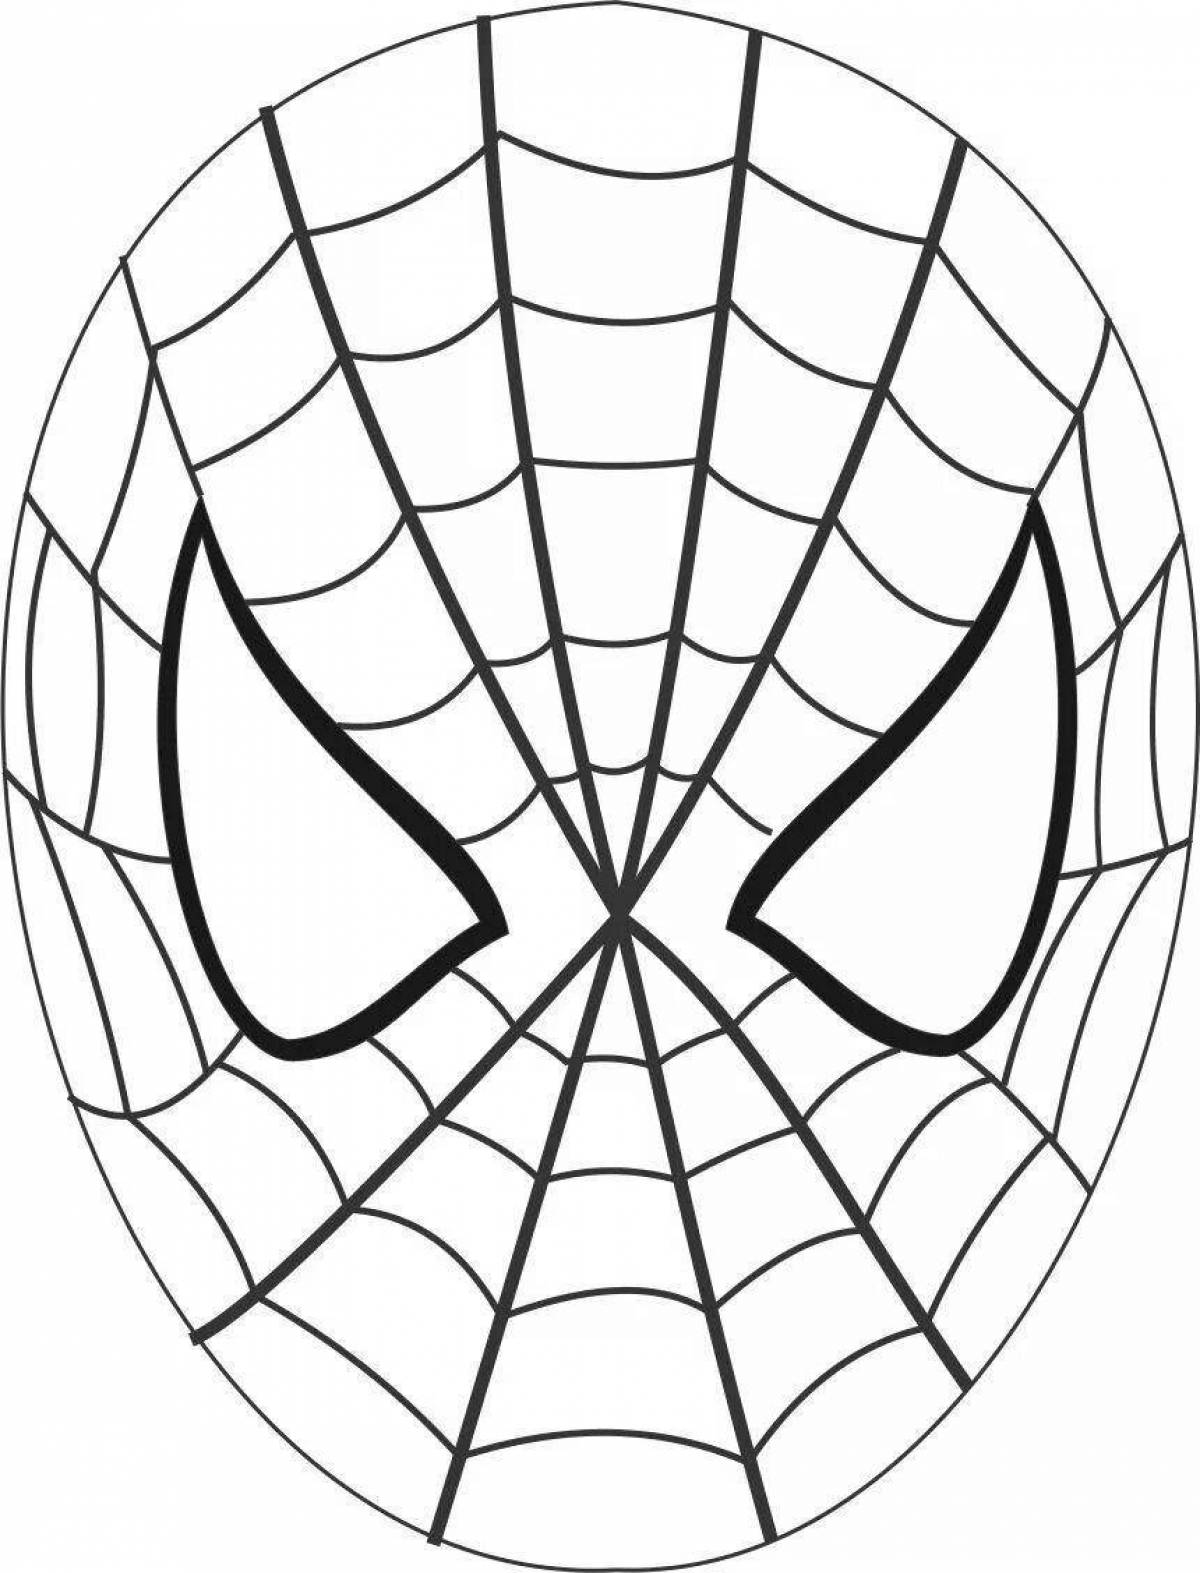 Coloring page exciting spiderman mask